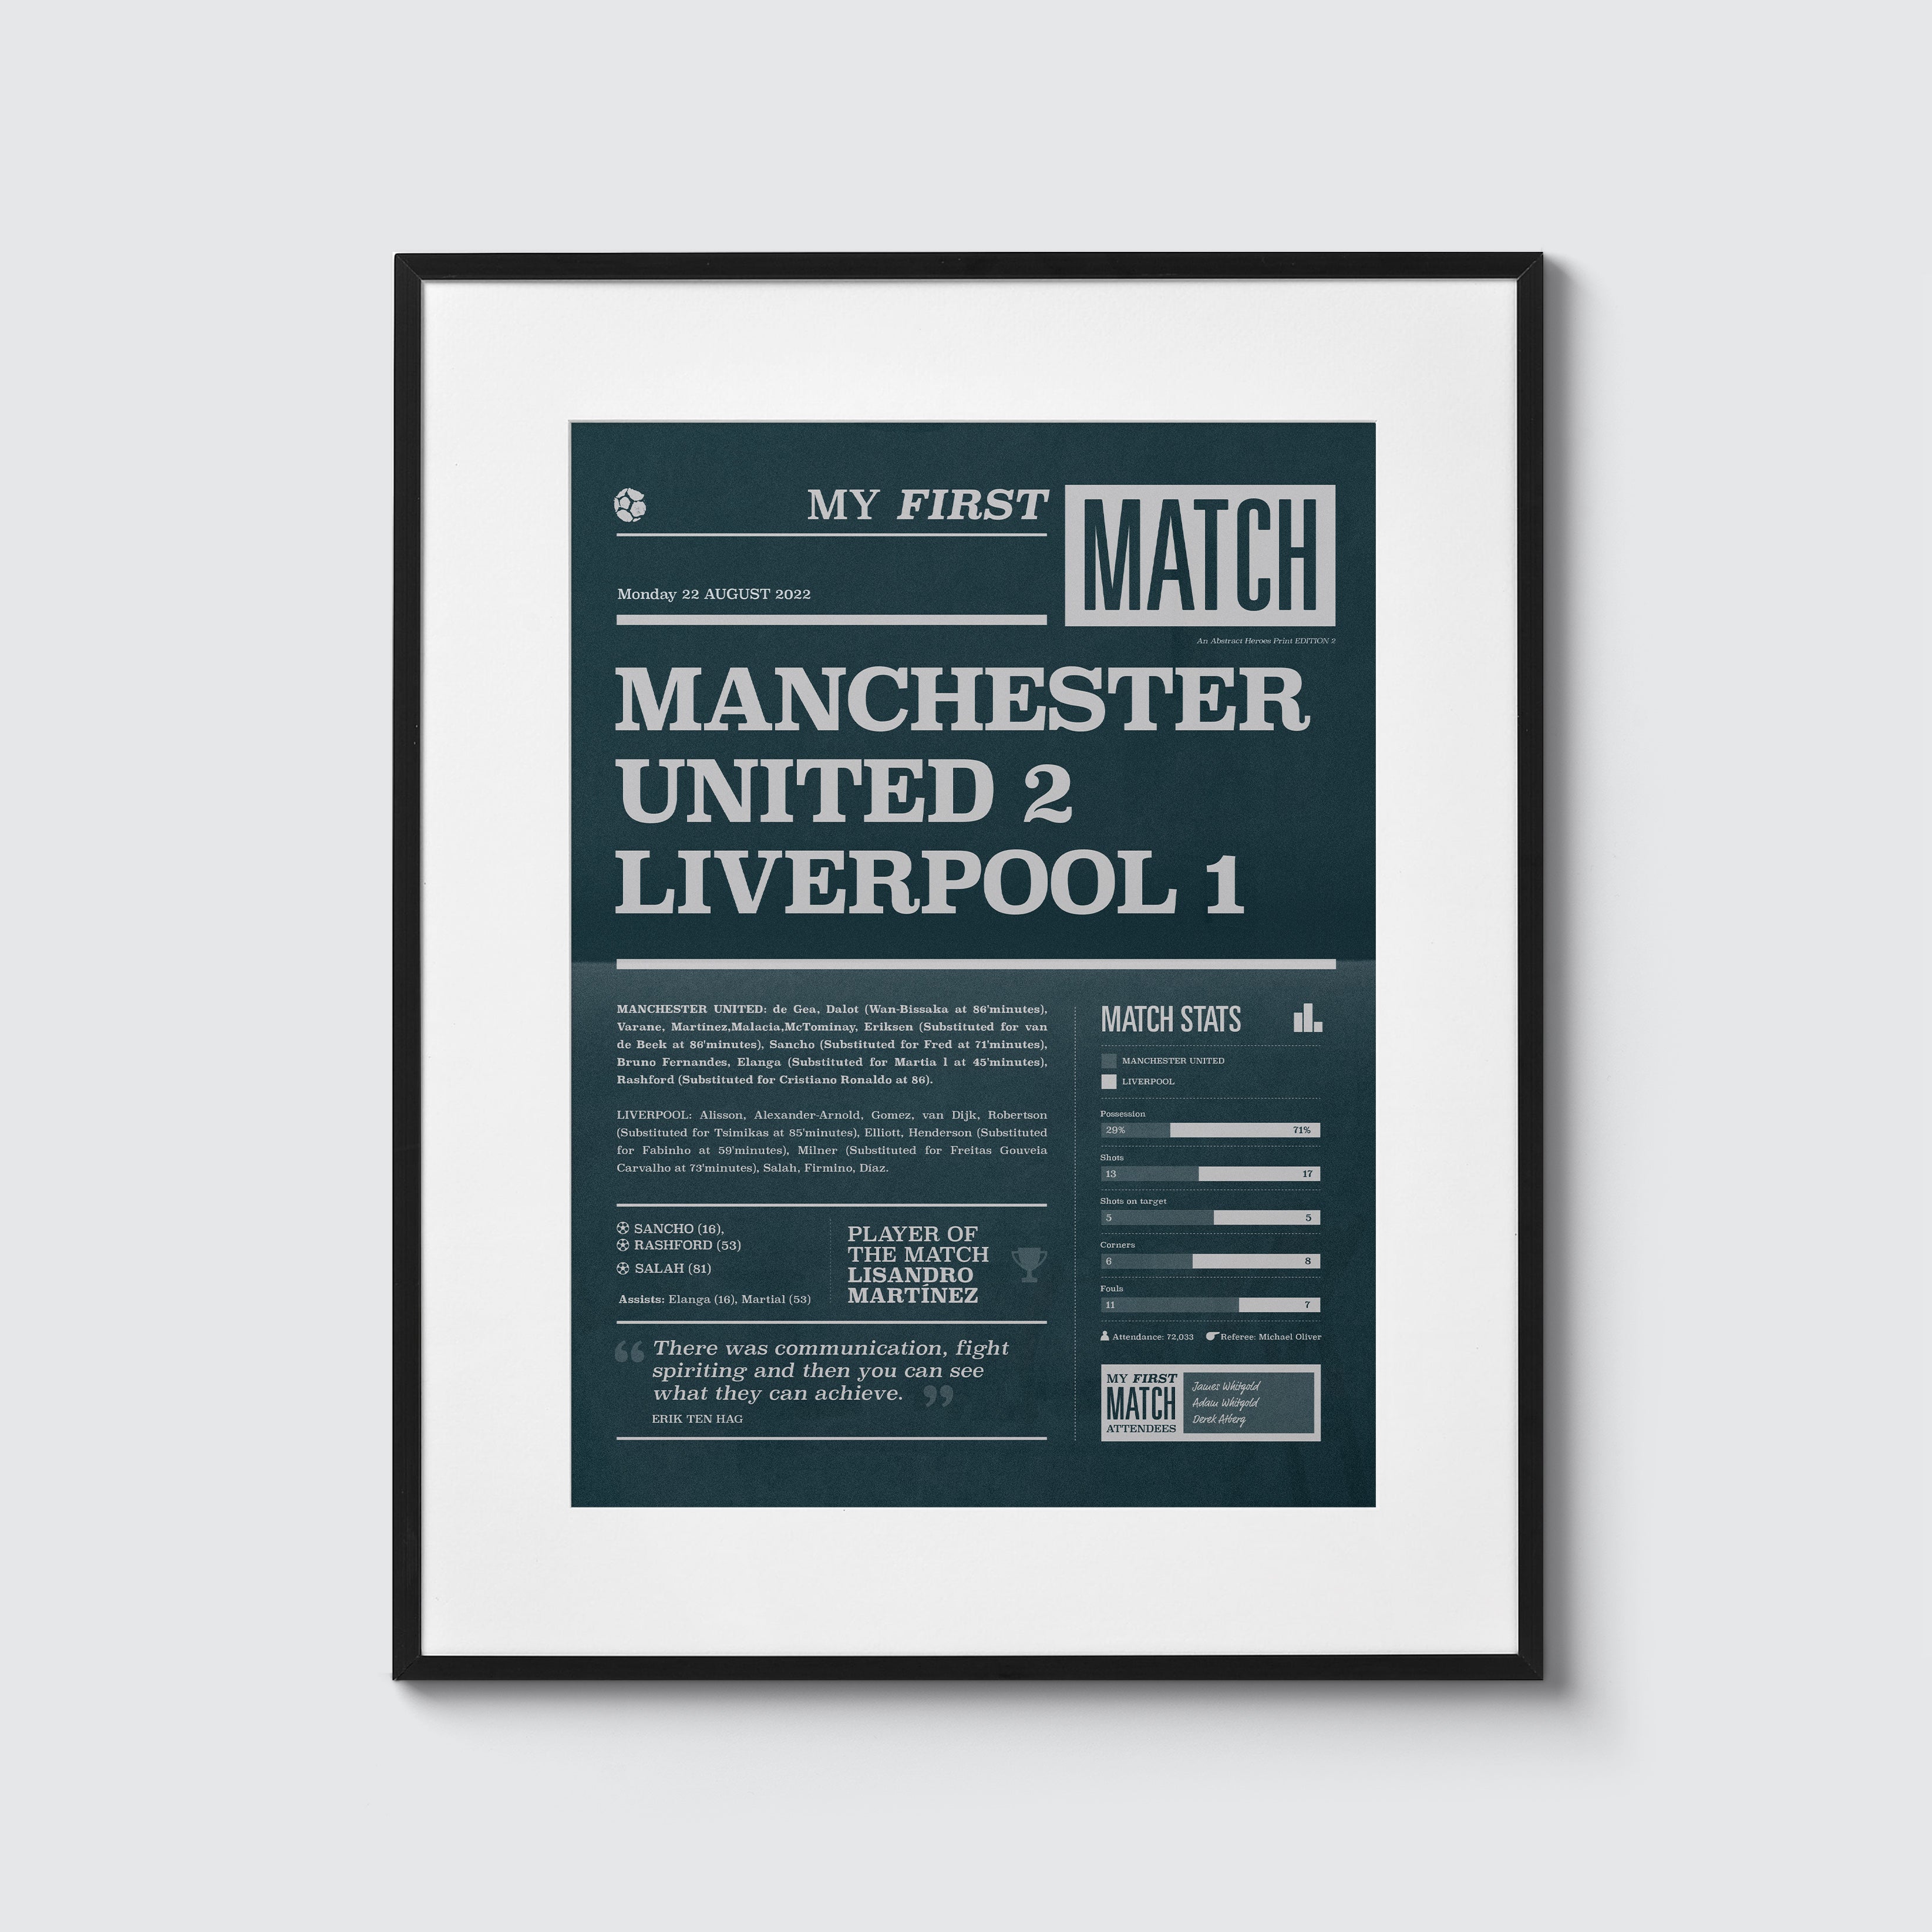 My first match – personalised prints